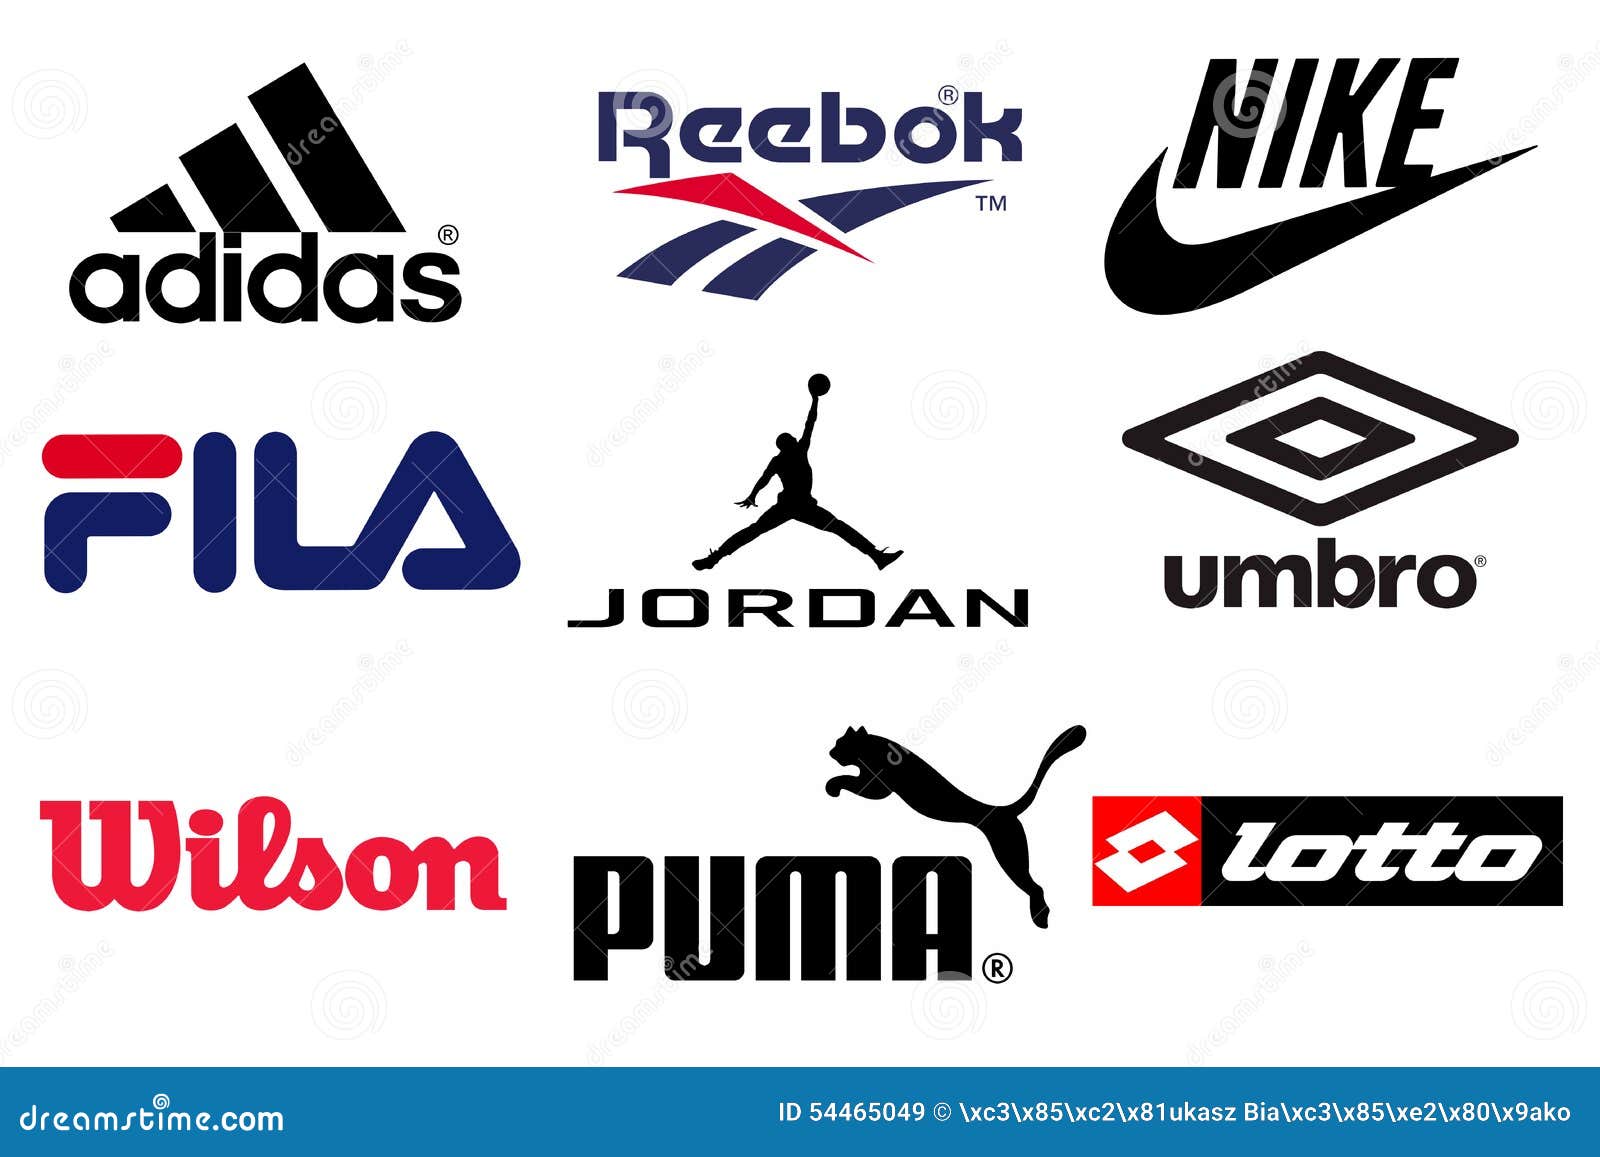 Sport Brands Editorial Stock Image - Image: 54465049